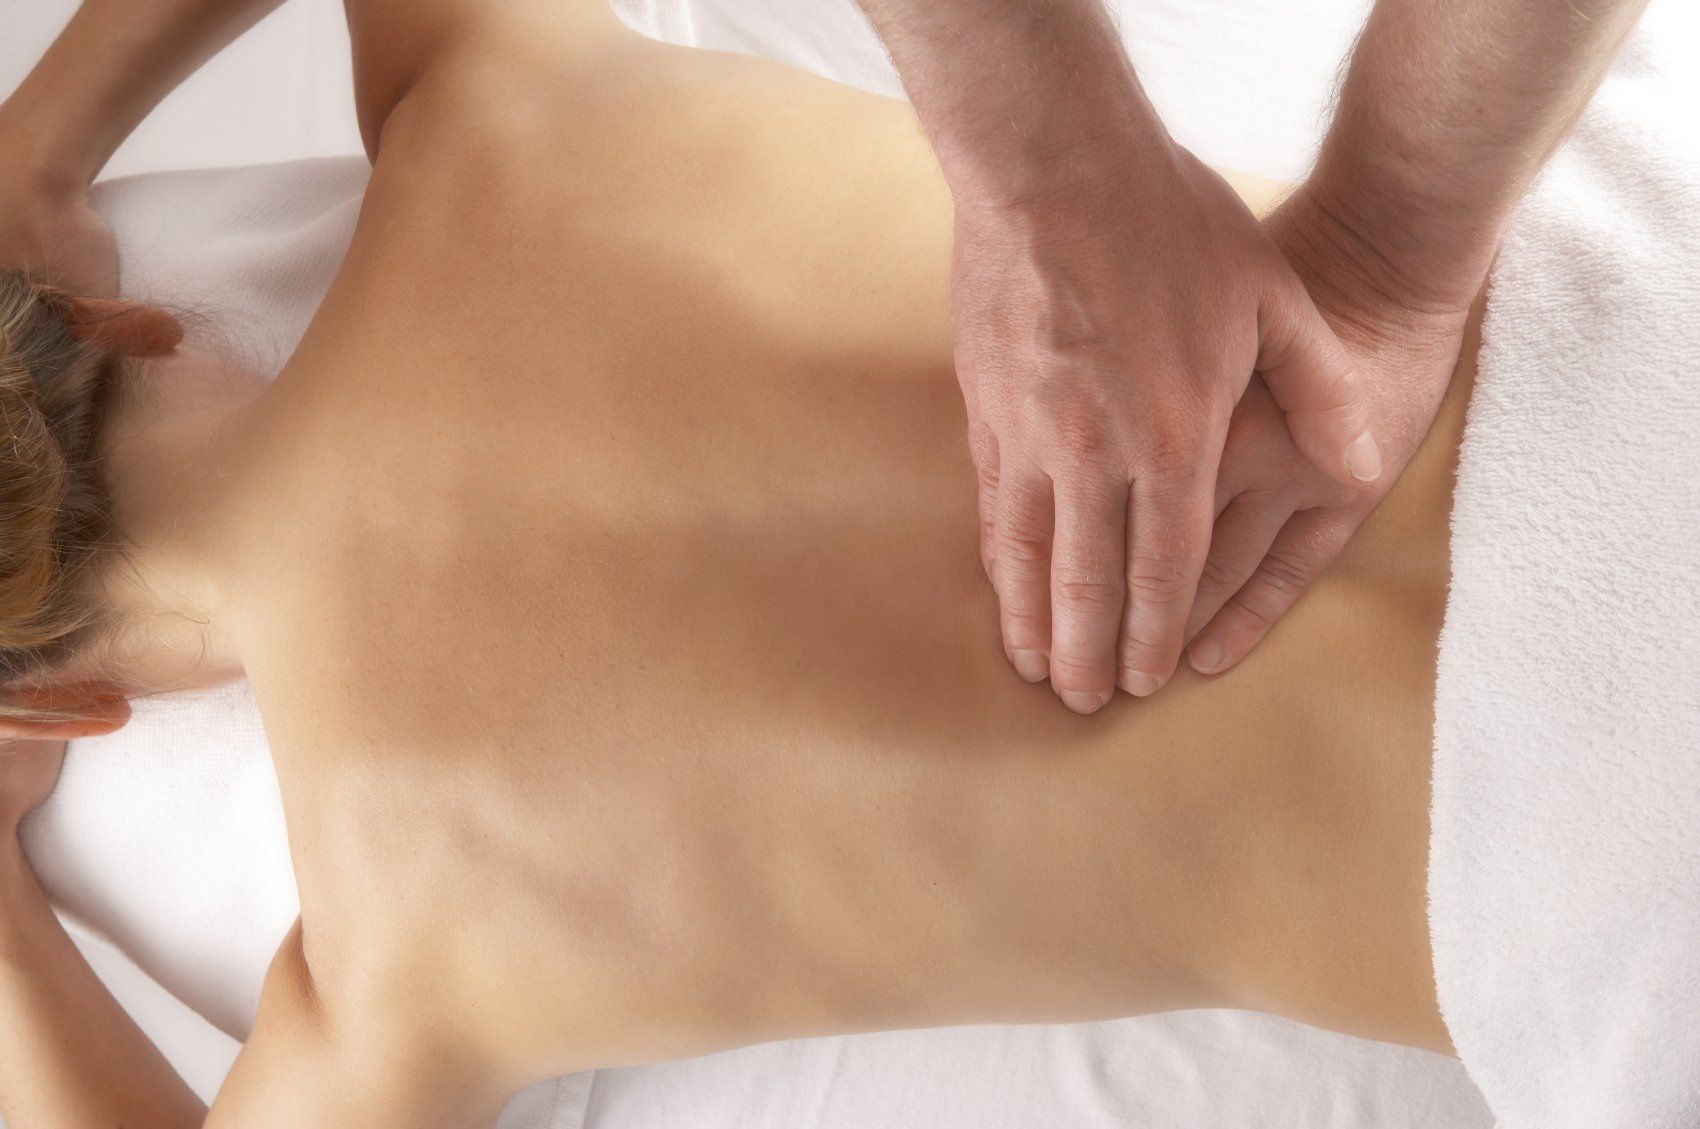 NeuroMuscular Massage Helps Relieve Pain & Tension.